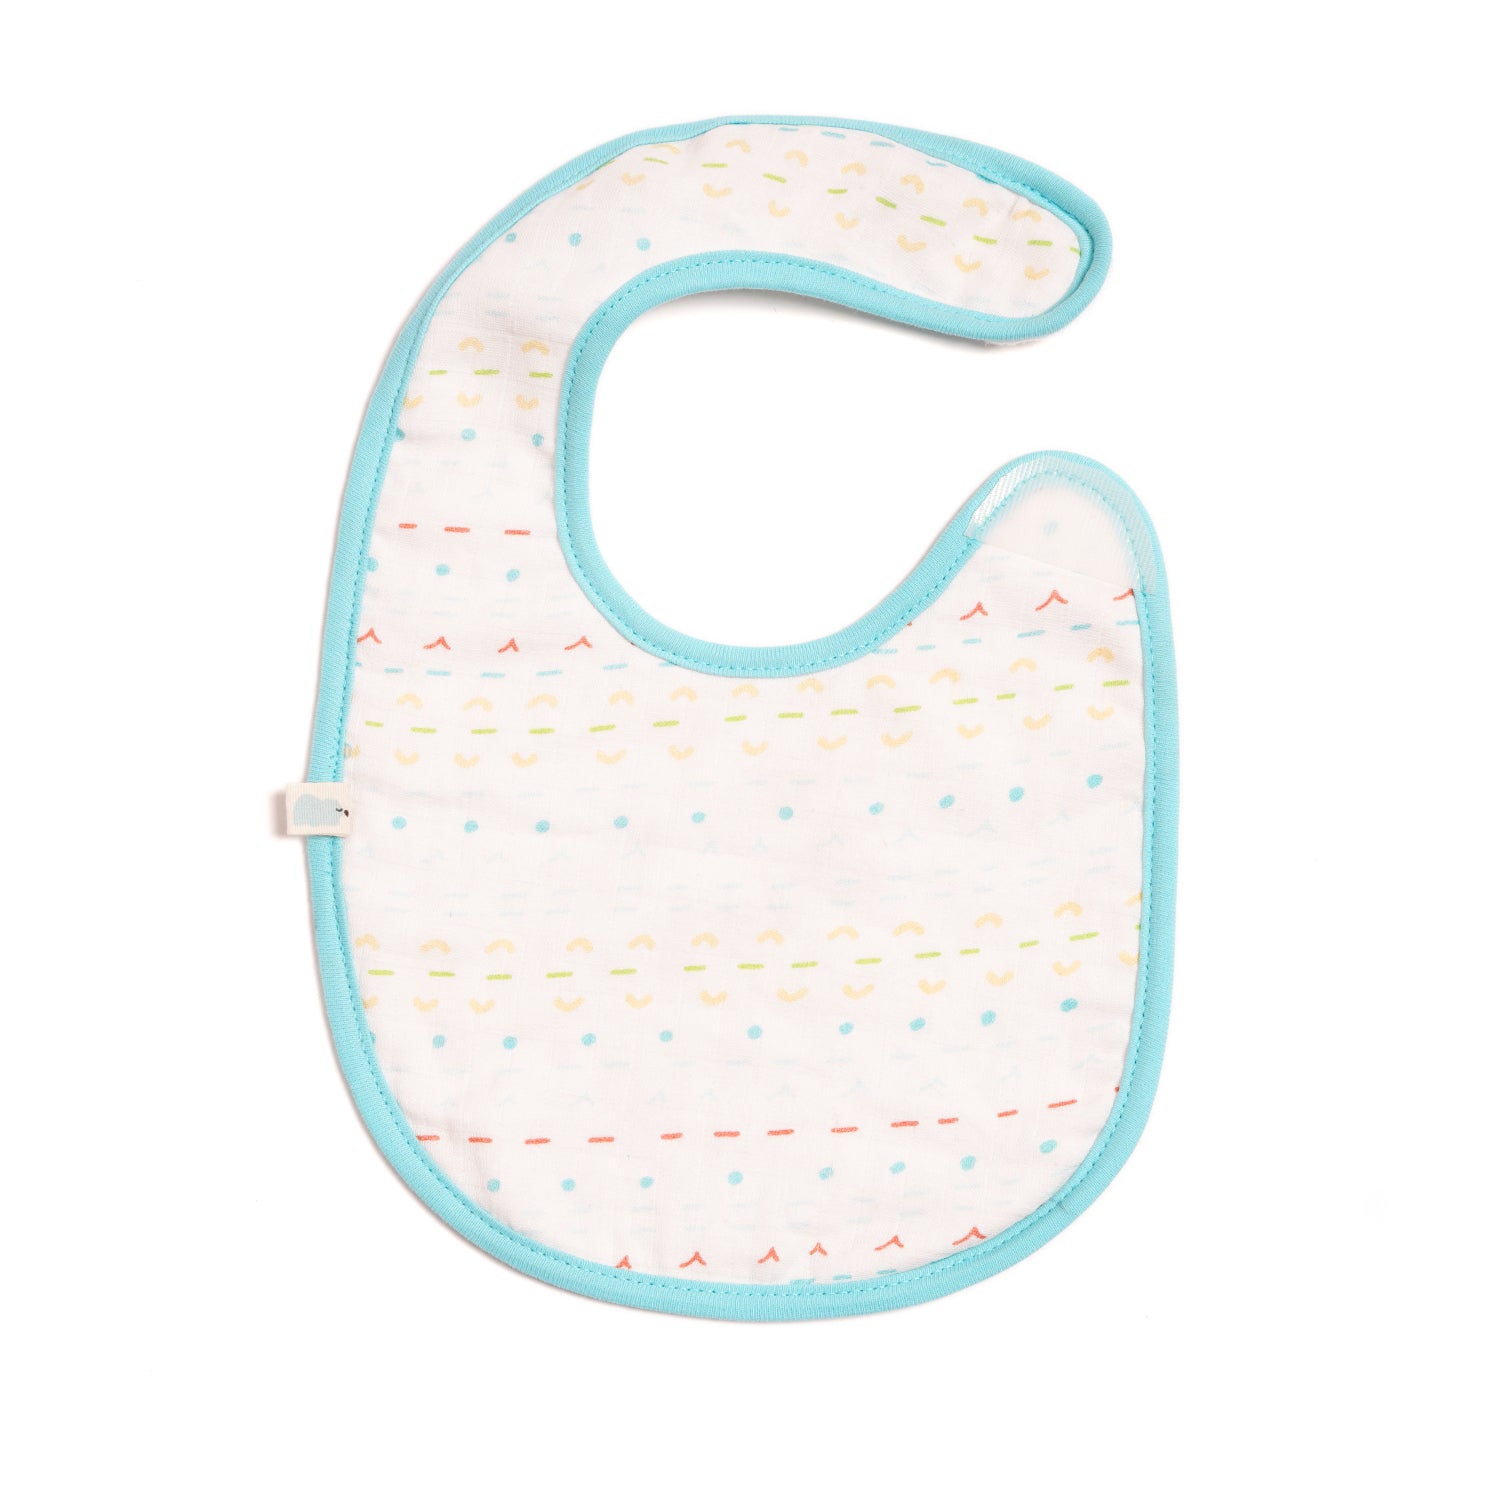 Cotton Muslin BIB for Baby - Lines & Dots